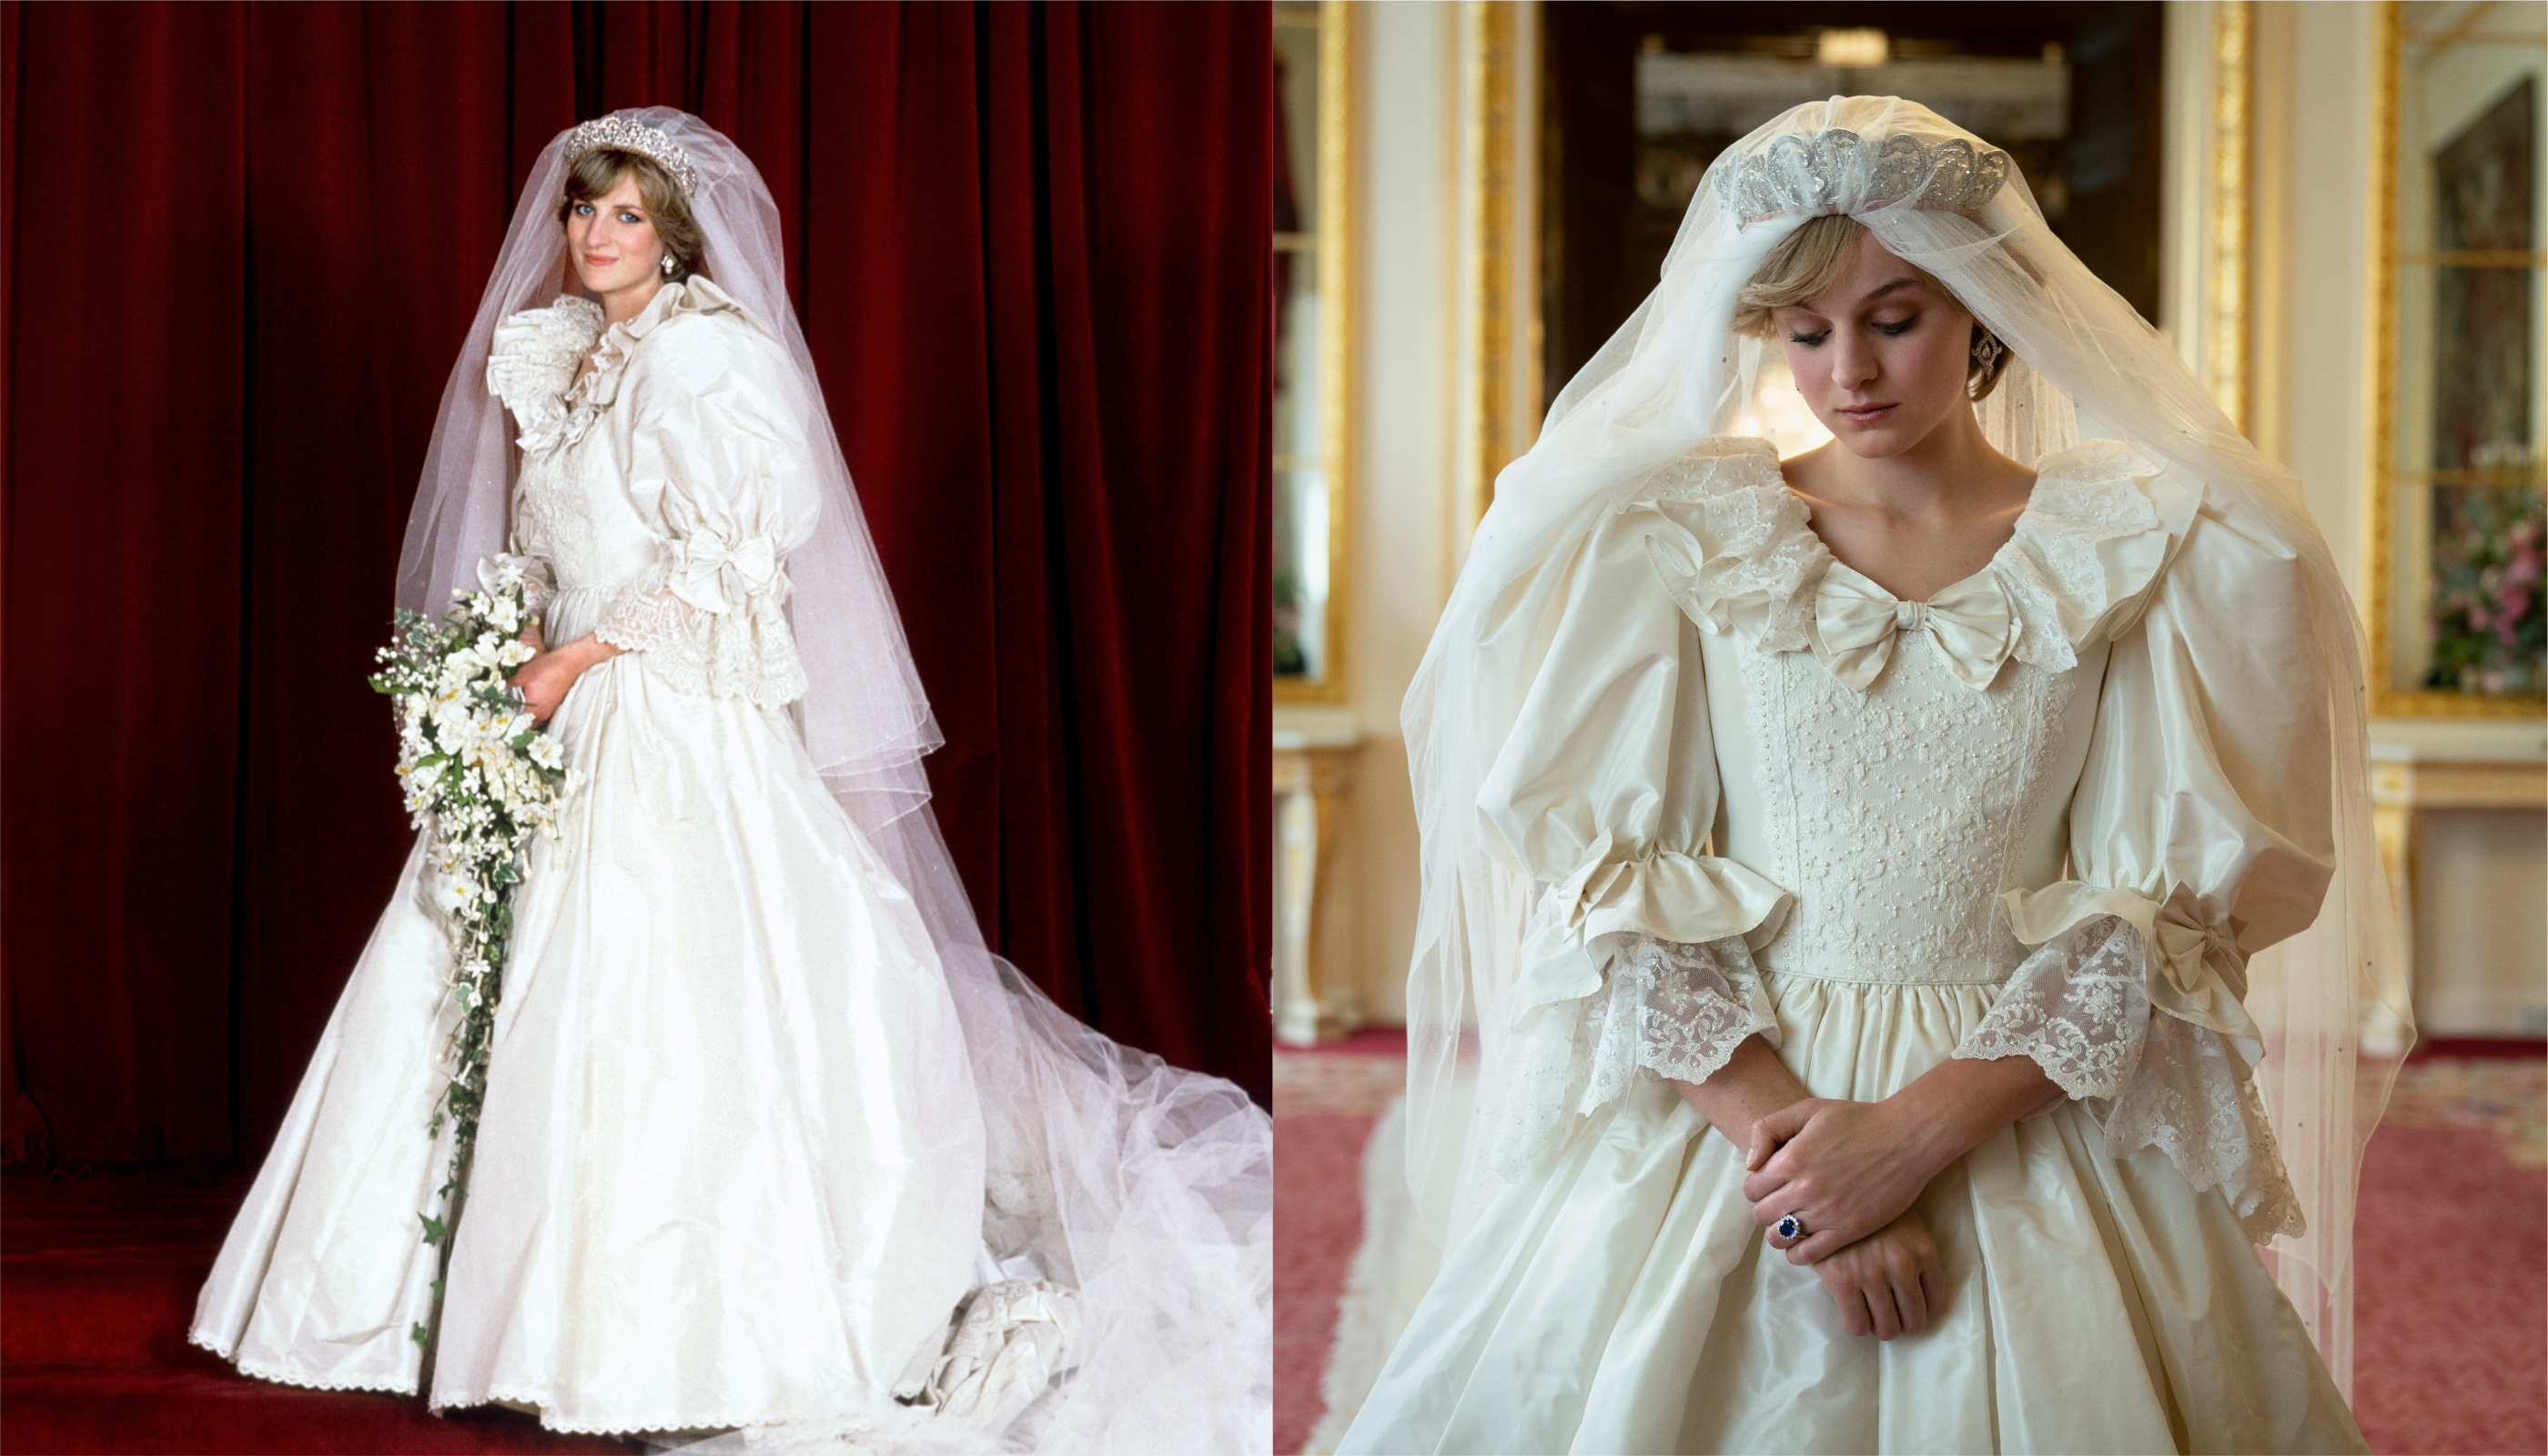 Diana's wedding dress and its on-screen replica